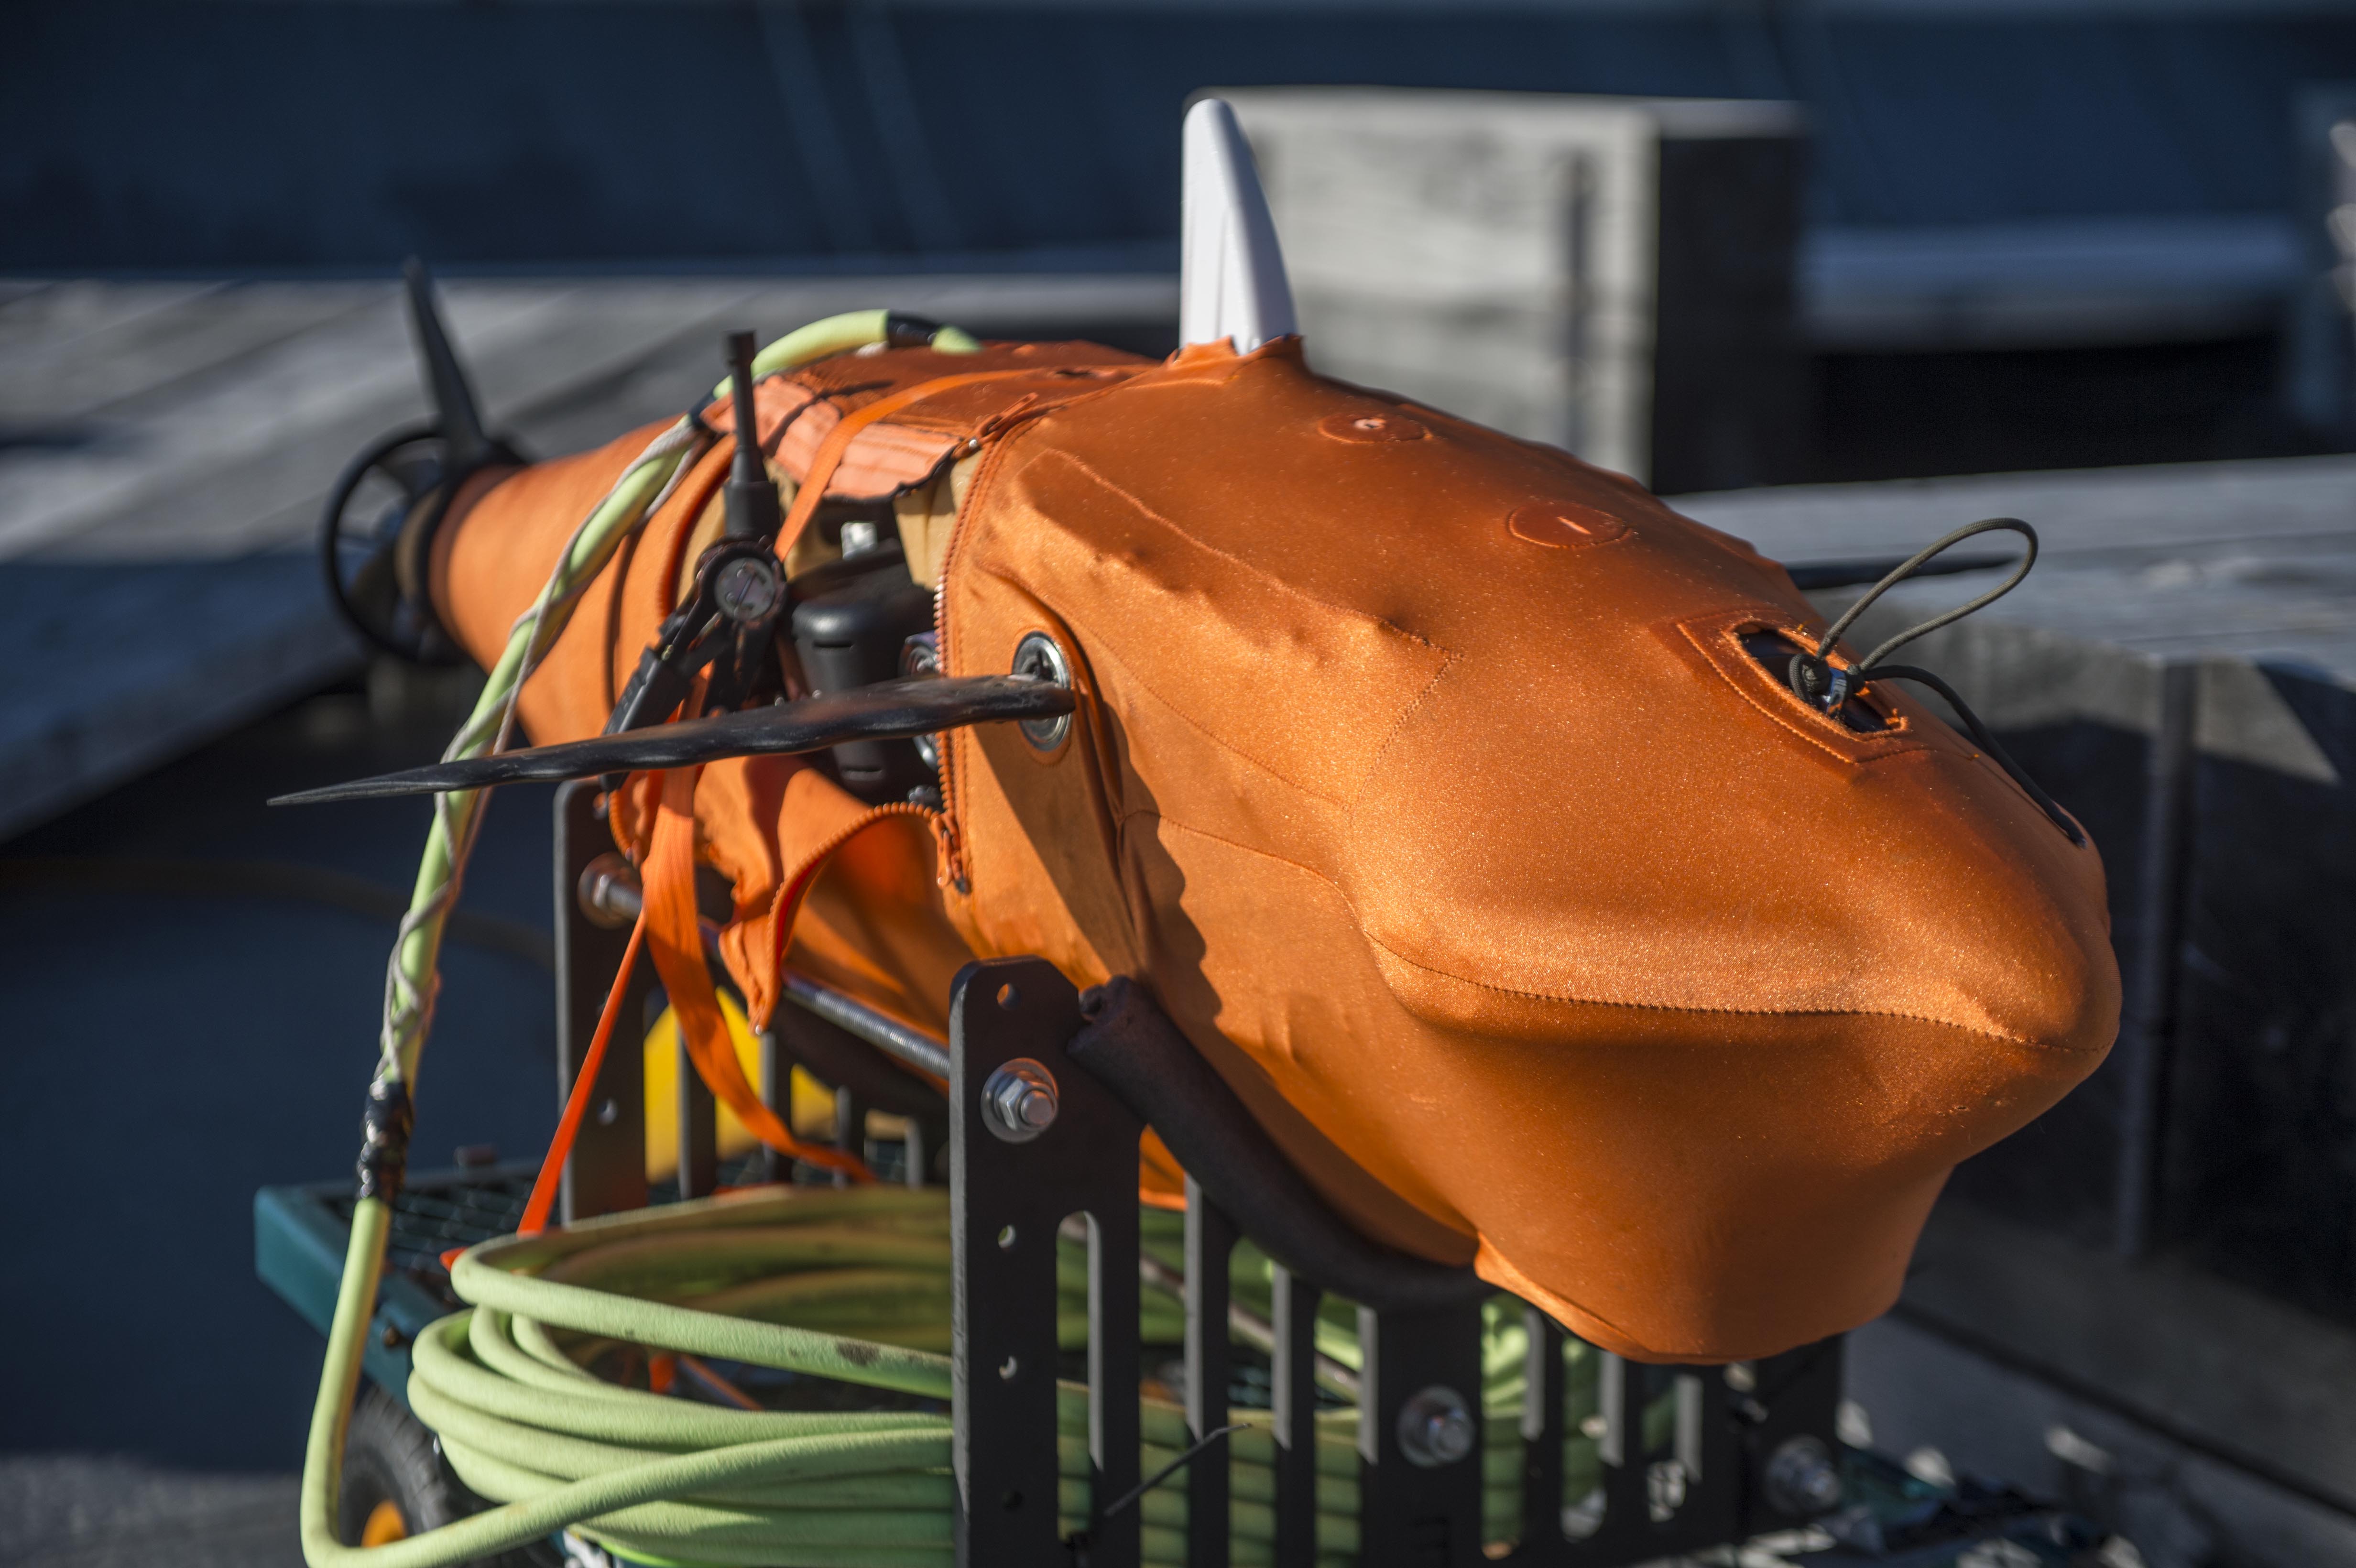 A variant model of the GhostSwimmer vehicle developed by the Chief of Naval Operations Rapid Innovation Cell project Silent NEMO, awaits testing during a demonstration at Joint Expeditionary Base Little Creek - Fort Story. Project Silent NEMO is an experiment which explores the possible uses for a biomimetic device developed by the Office of Naval Research.  (U.S. Navy photo by Mass Communication Specialist 3rd Class Edward Guttierrez III/Released) 